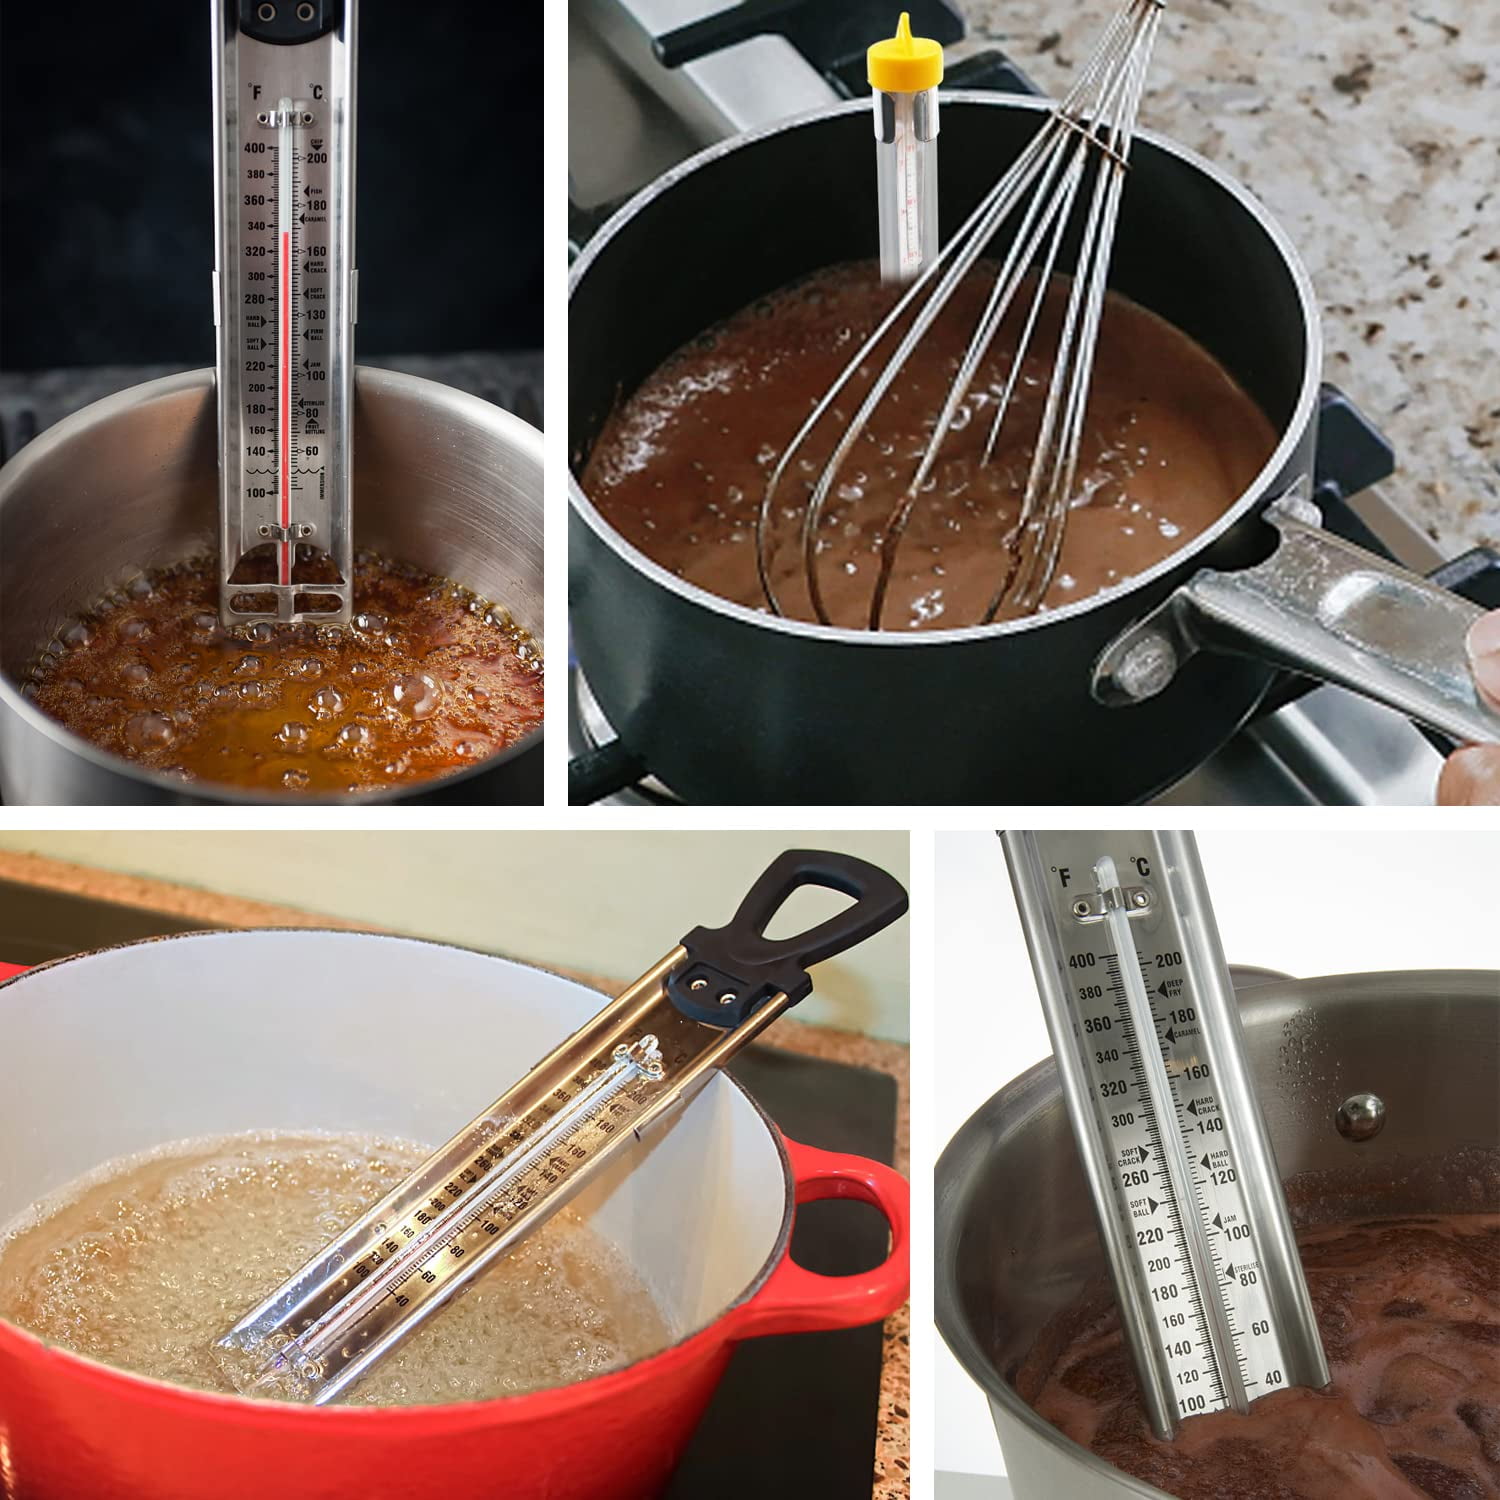 Candy Thermometer Deep Fry/Jam/Sugar/Syrup/Jelly Thermometer with Hanging  Hook & Pot Clip Stainless Steel Cooking Food Thermometer Quick Reference